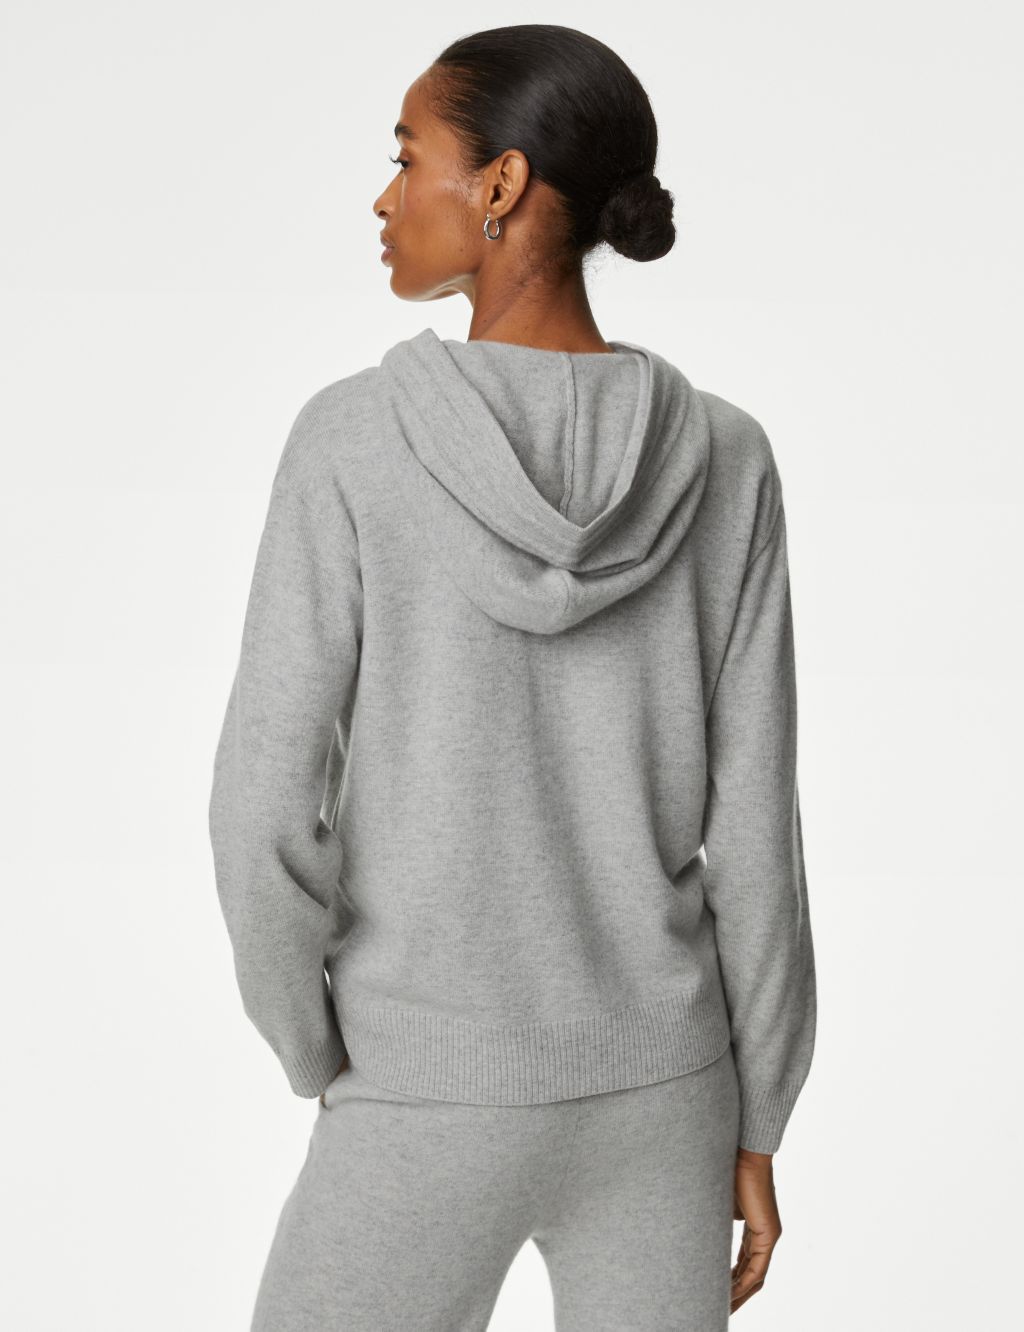 Pure Cashmere Zip Up Hoodie image 5